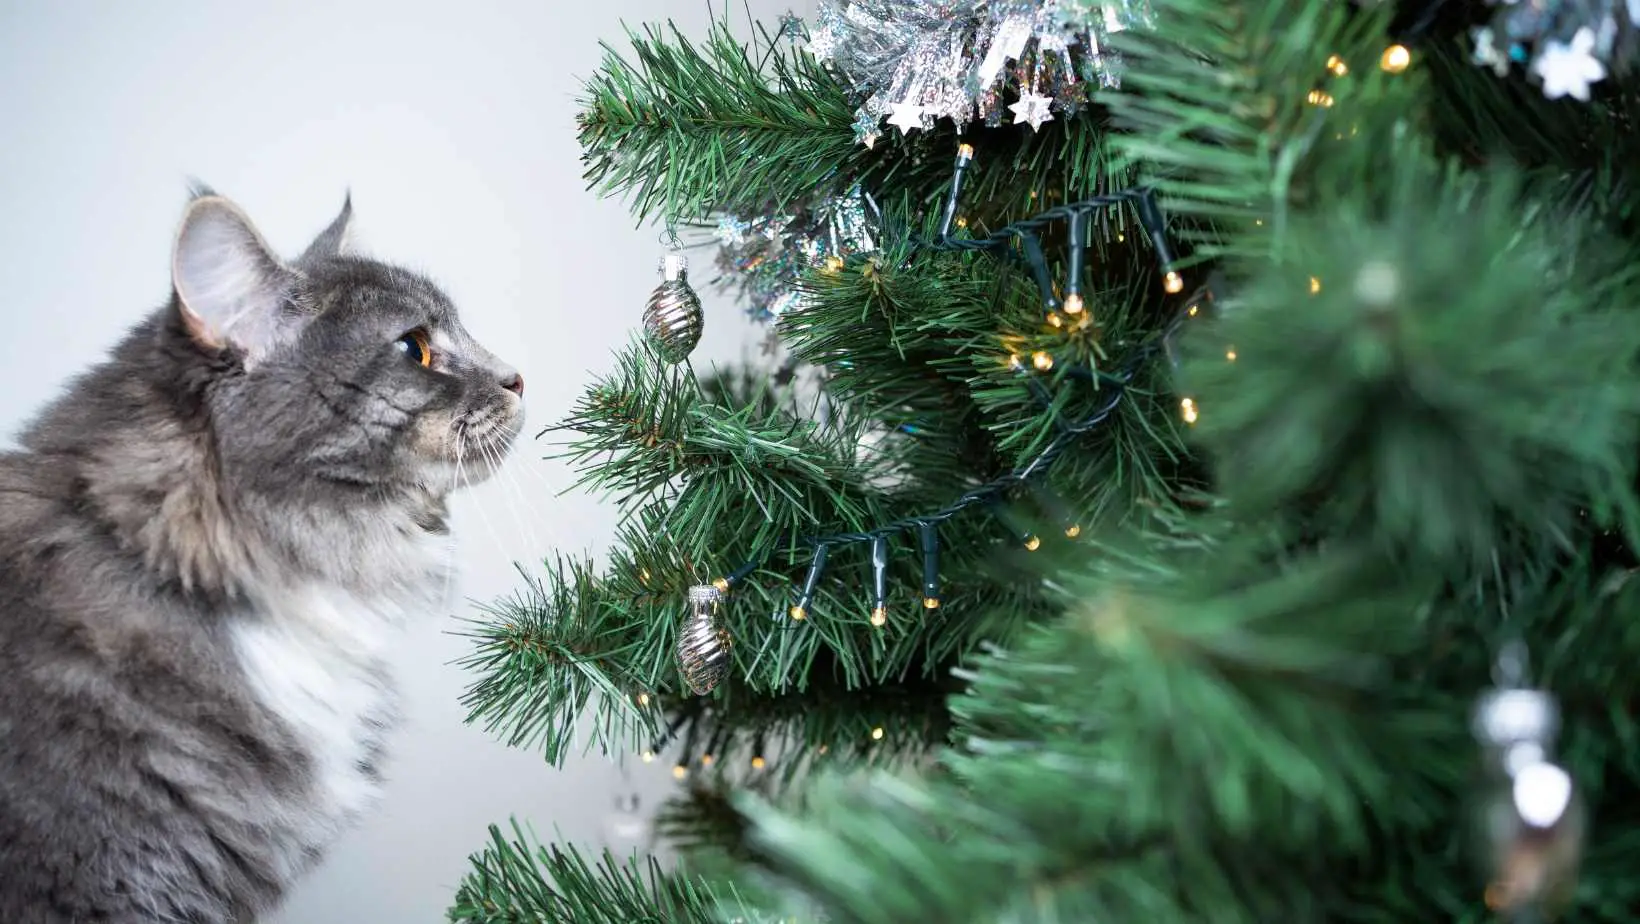 What Christmas Tree is Best for Cats?